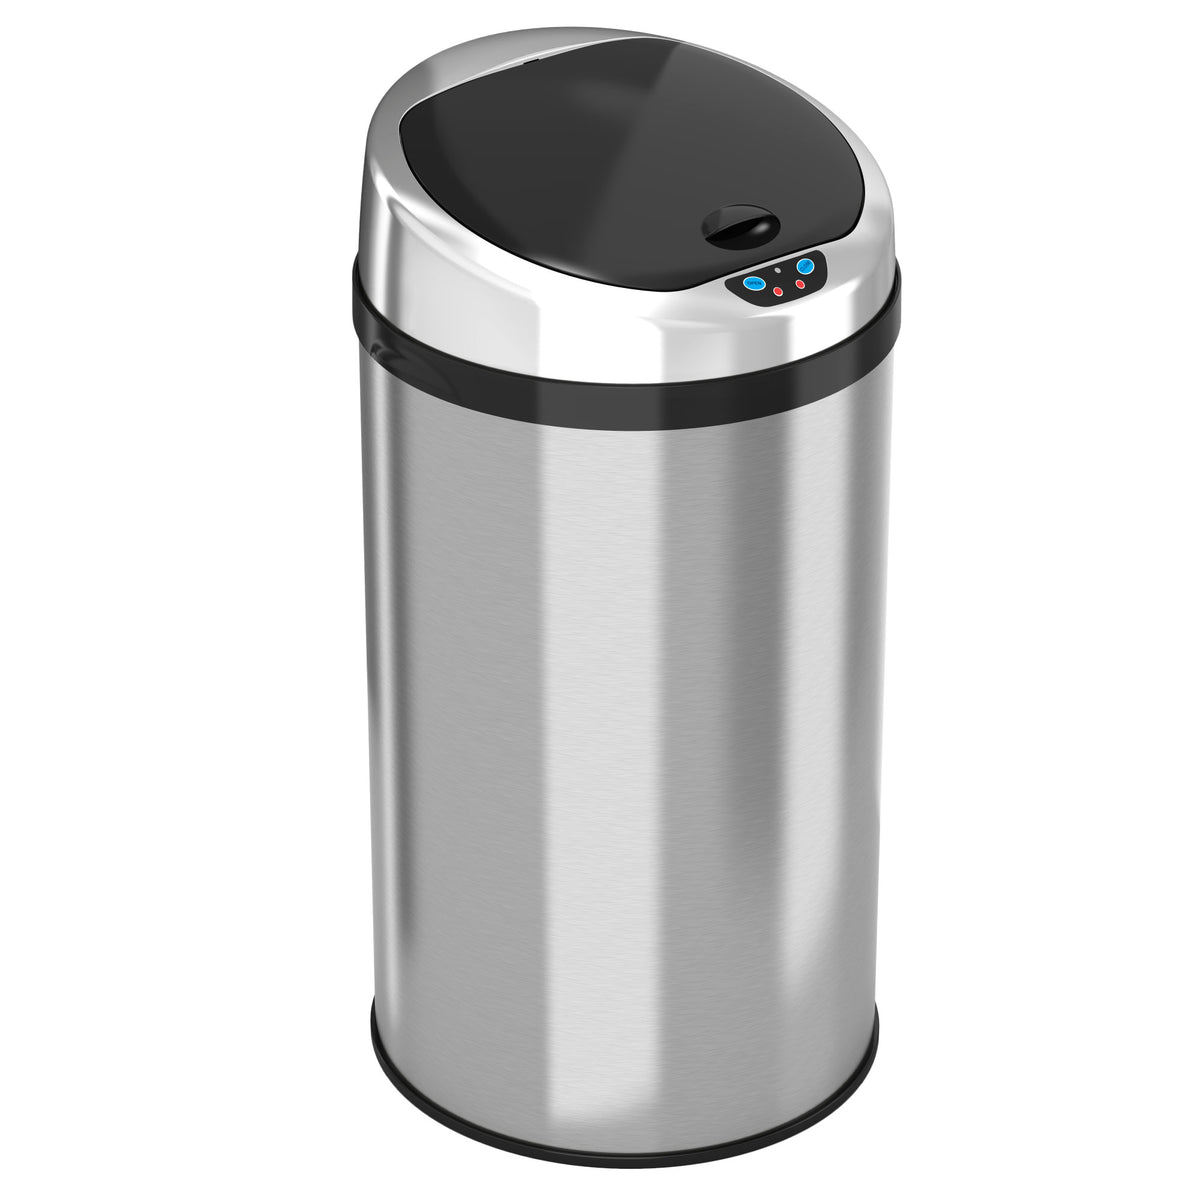 iTouchless Pet-Proof Sensor Kitchen Trash Can with AbsorbX Odor Filter 13 Gallon Silver Stainless Steel